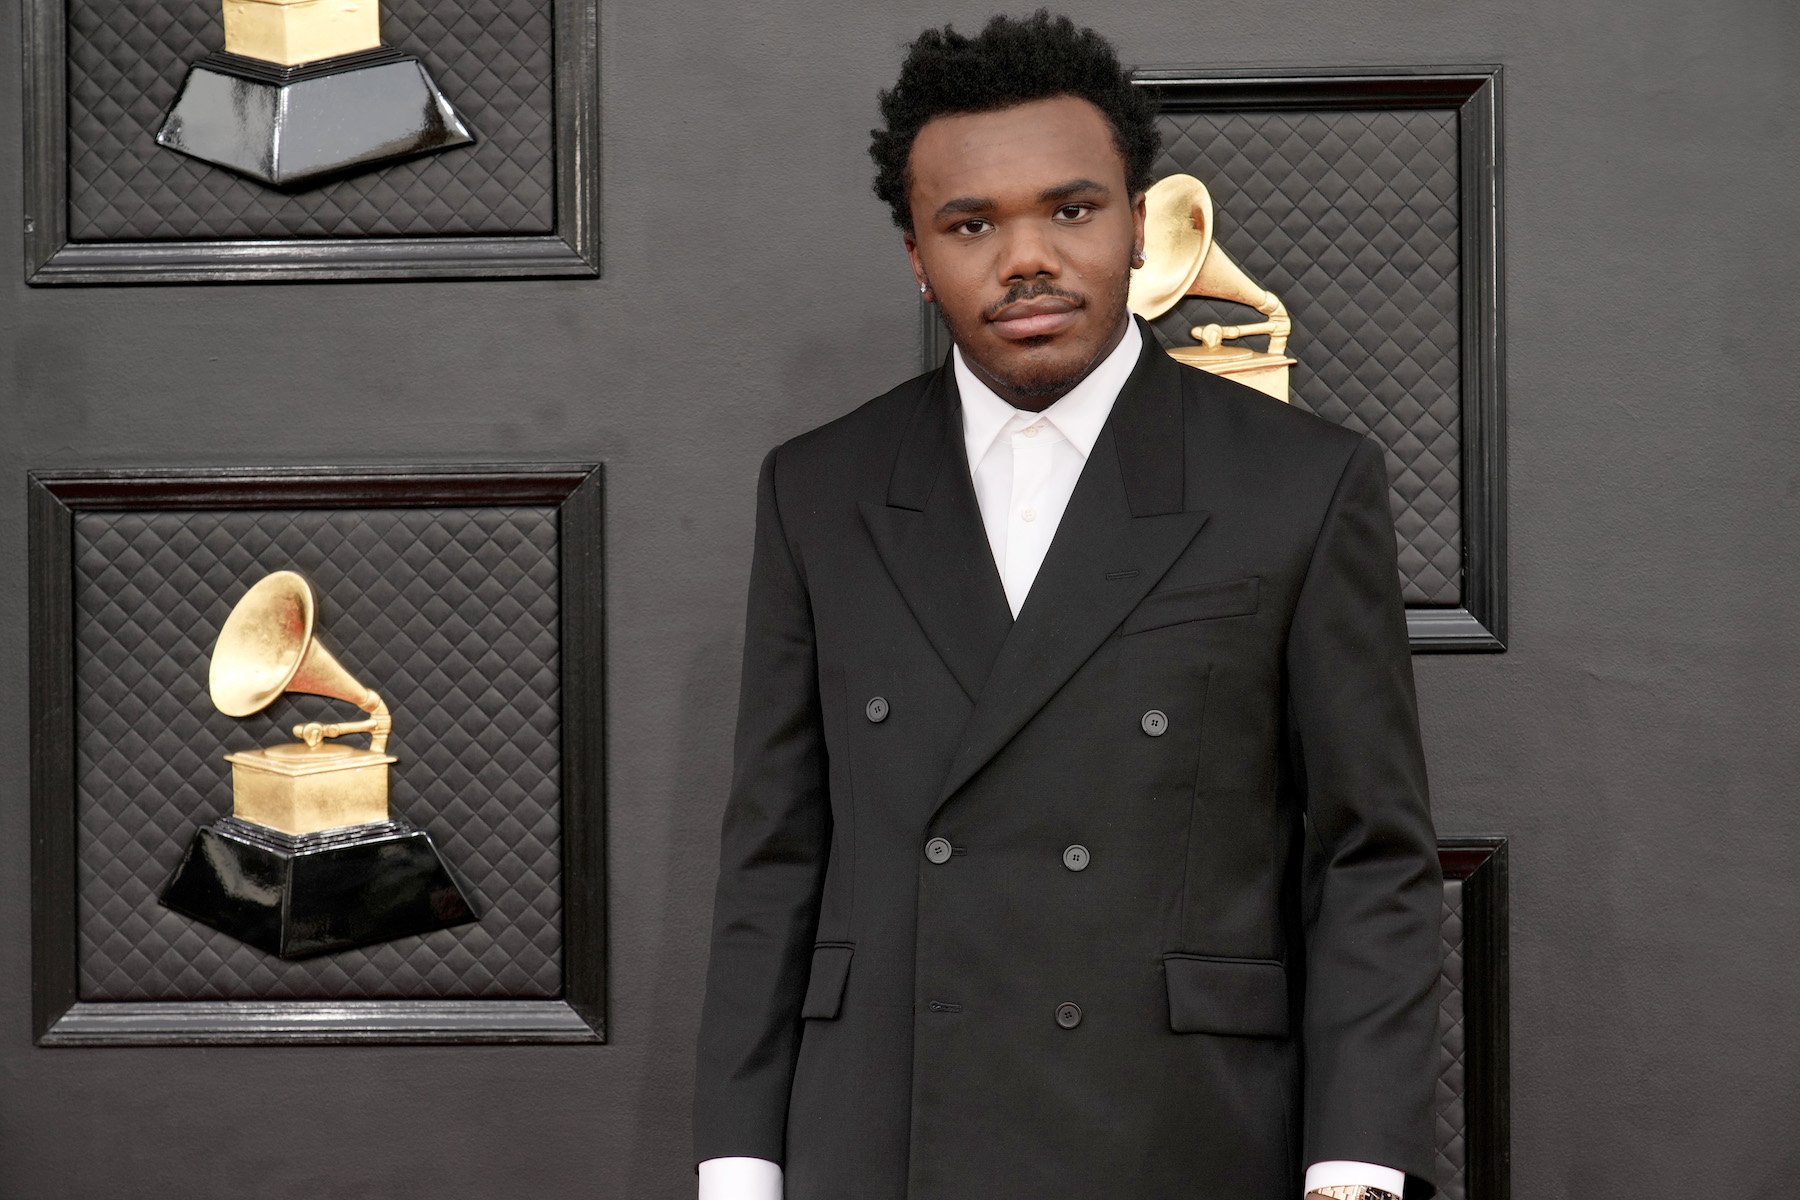 Baby Keem, Kendrick Lamar's cousin, wearing a suit at the Grammy Awards.